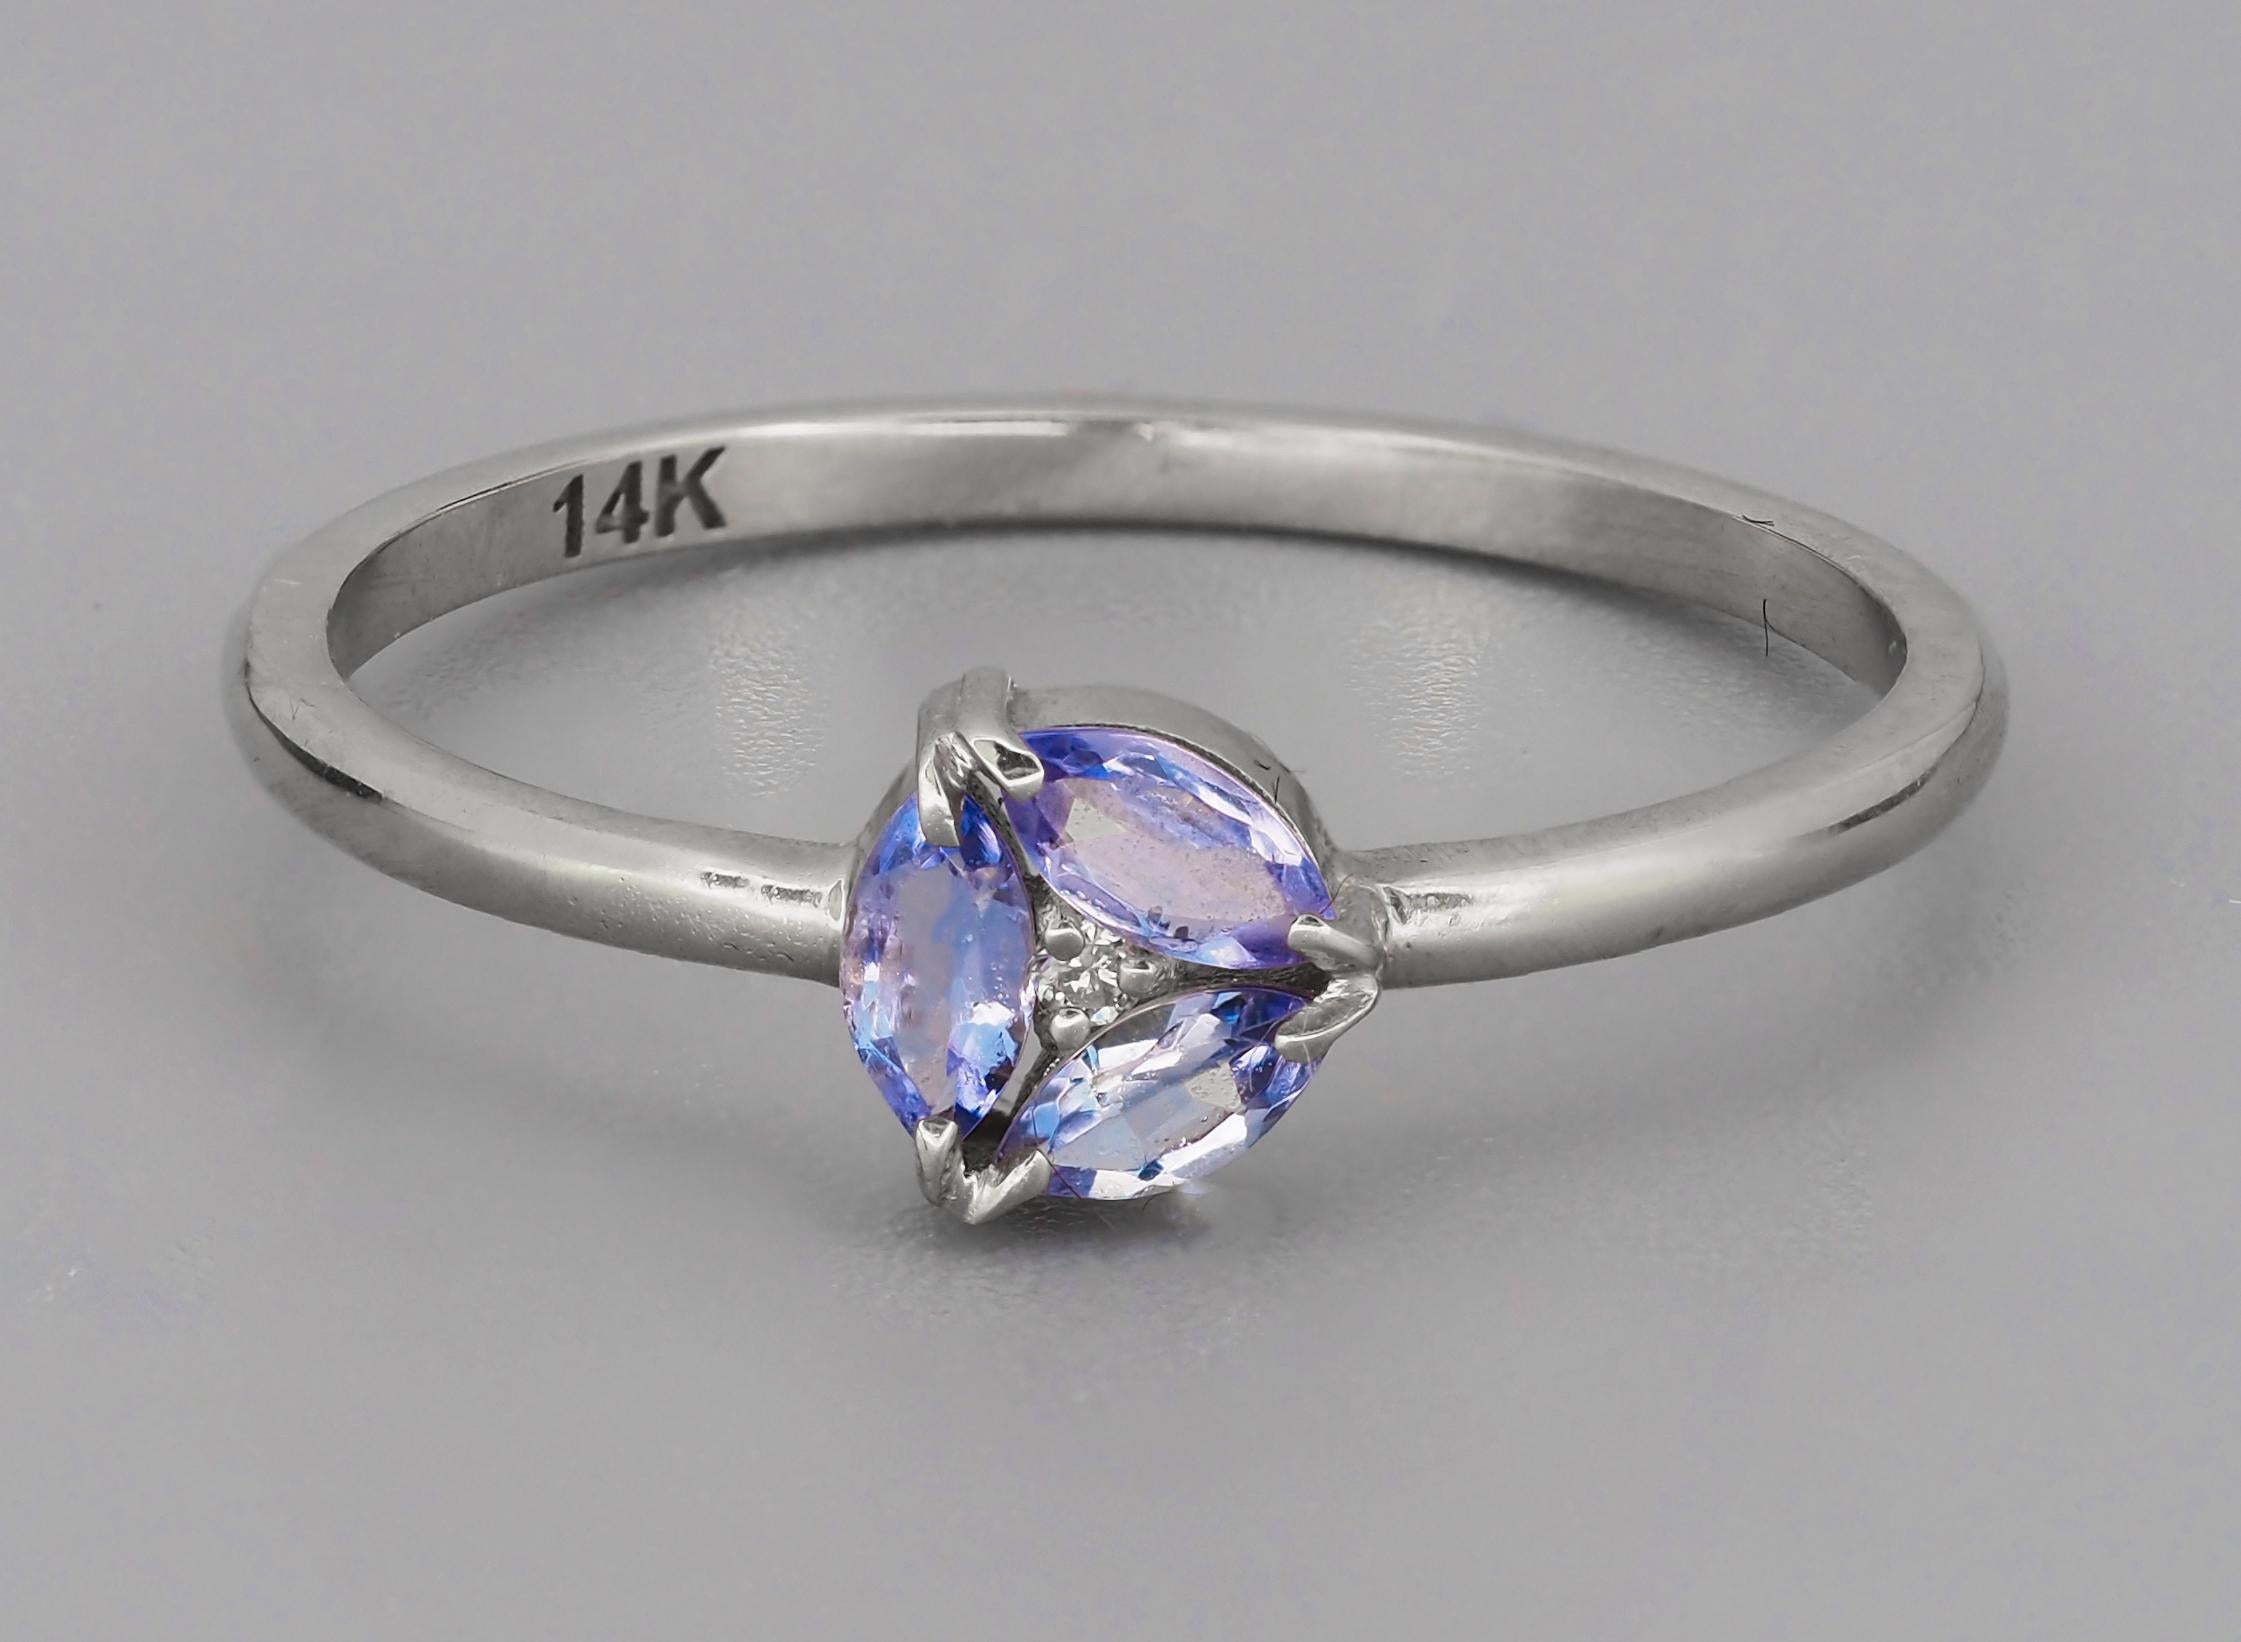 Marquise Tanzanite 14k gold ring. 
Minimalist tanzanite ring. December Birthstone ring. Delicate tanzanite ring. 3 gemstone ring.

Metal: 14k gold
Weight: 1.3 g. depends from size.

Set with tanzanites.
Marquise shape, light violetish blue color,